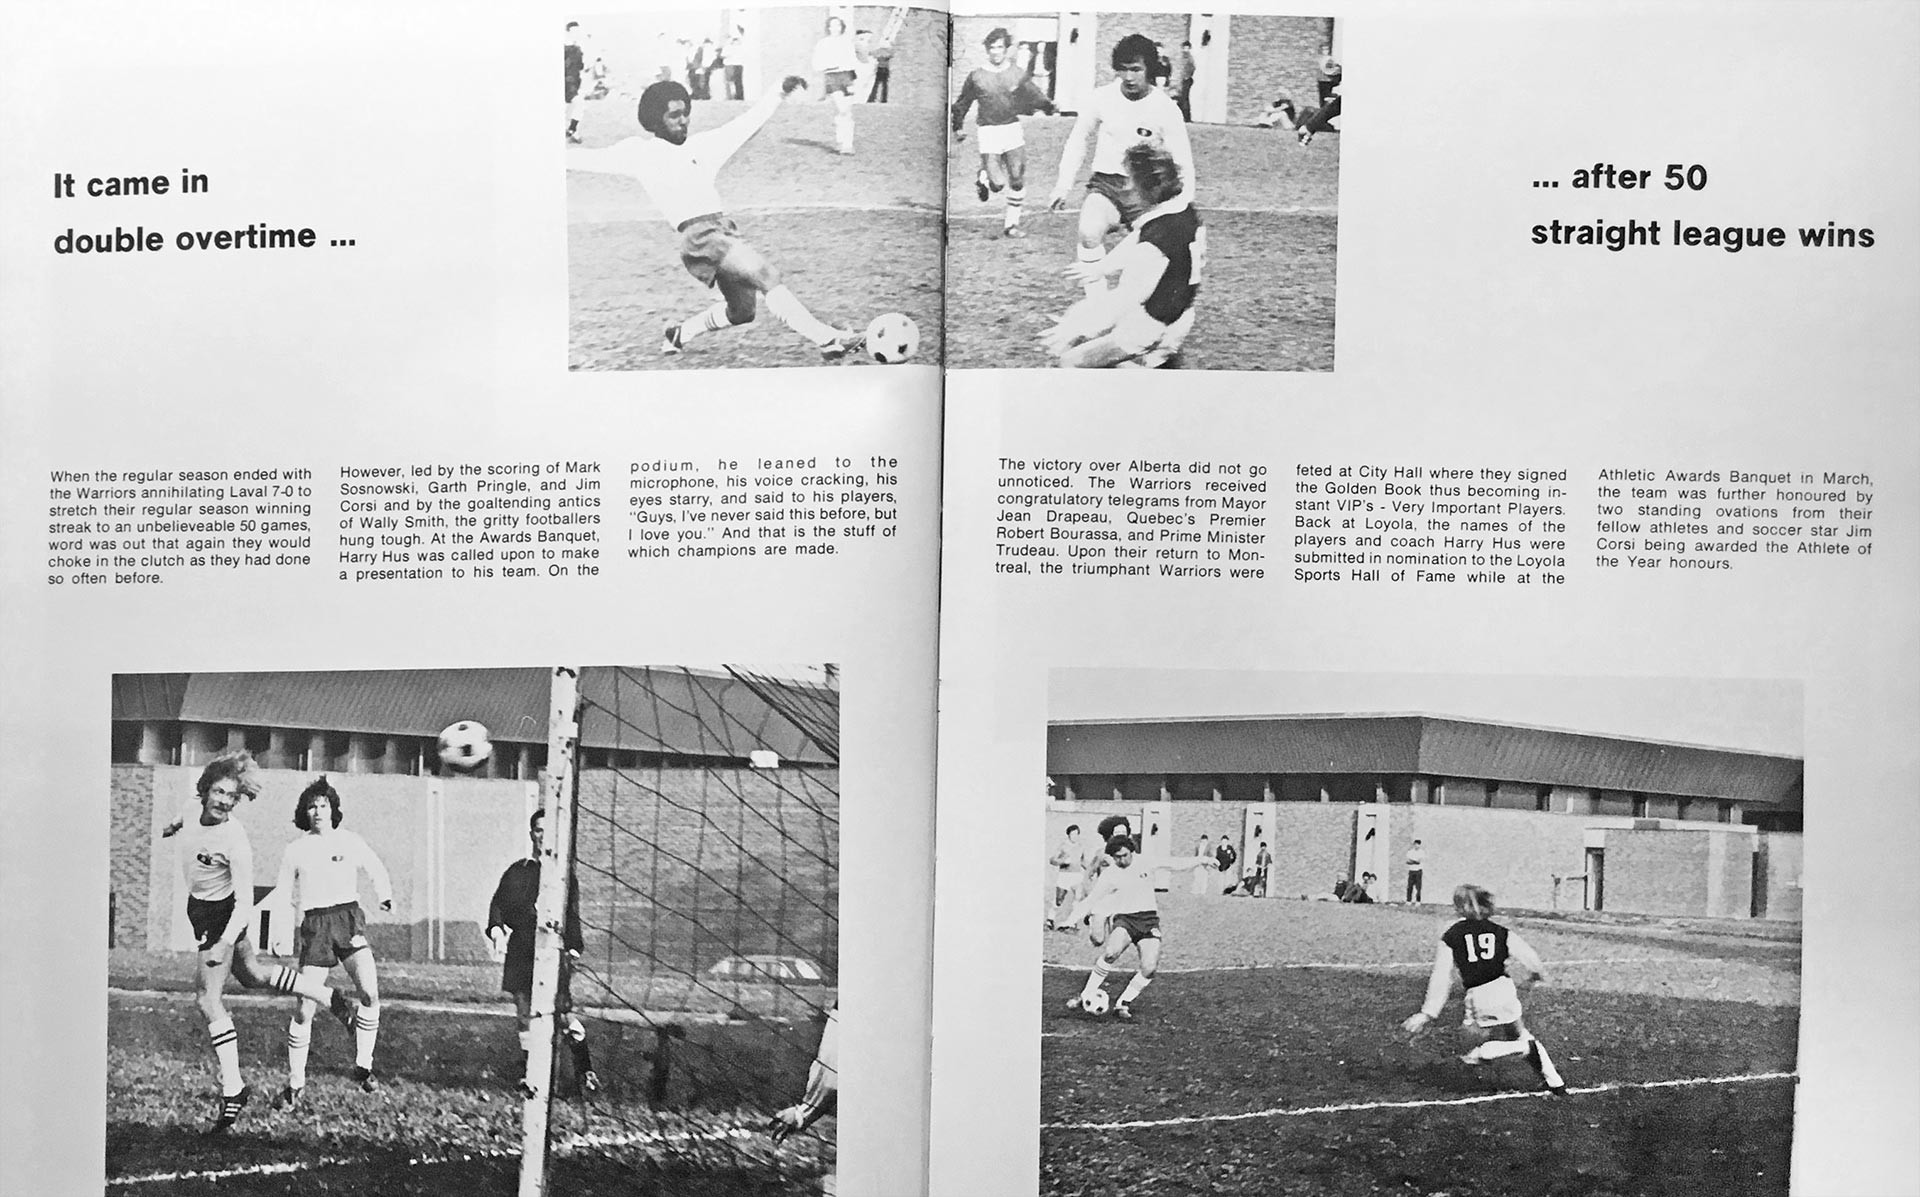 A two-page spread from the Loyola yearbook with pictures of the team playing on the soccer pitch